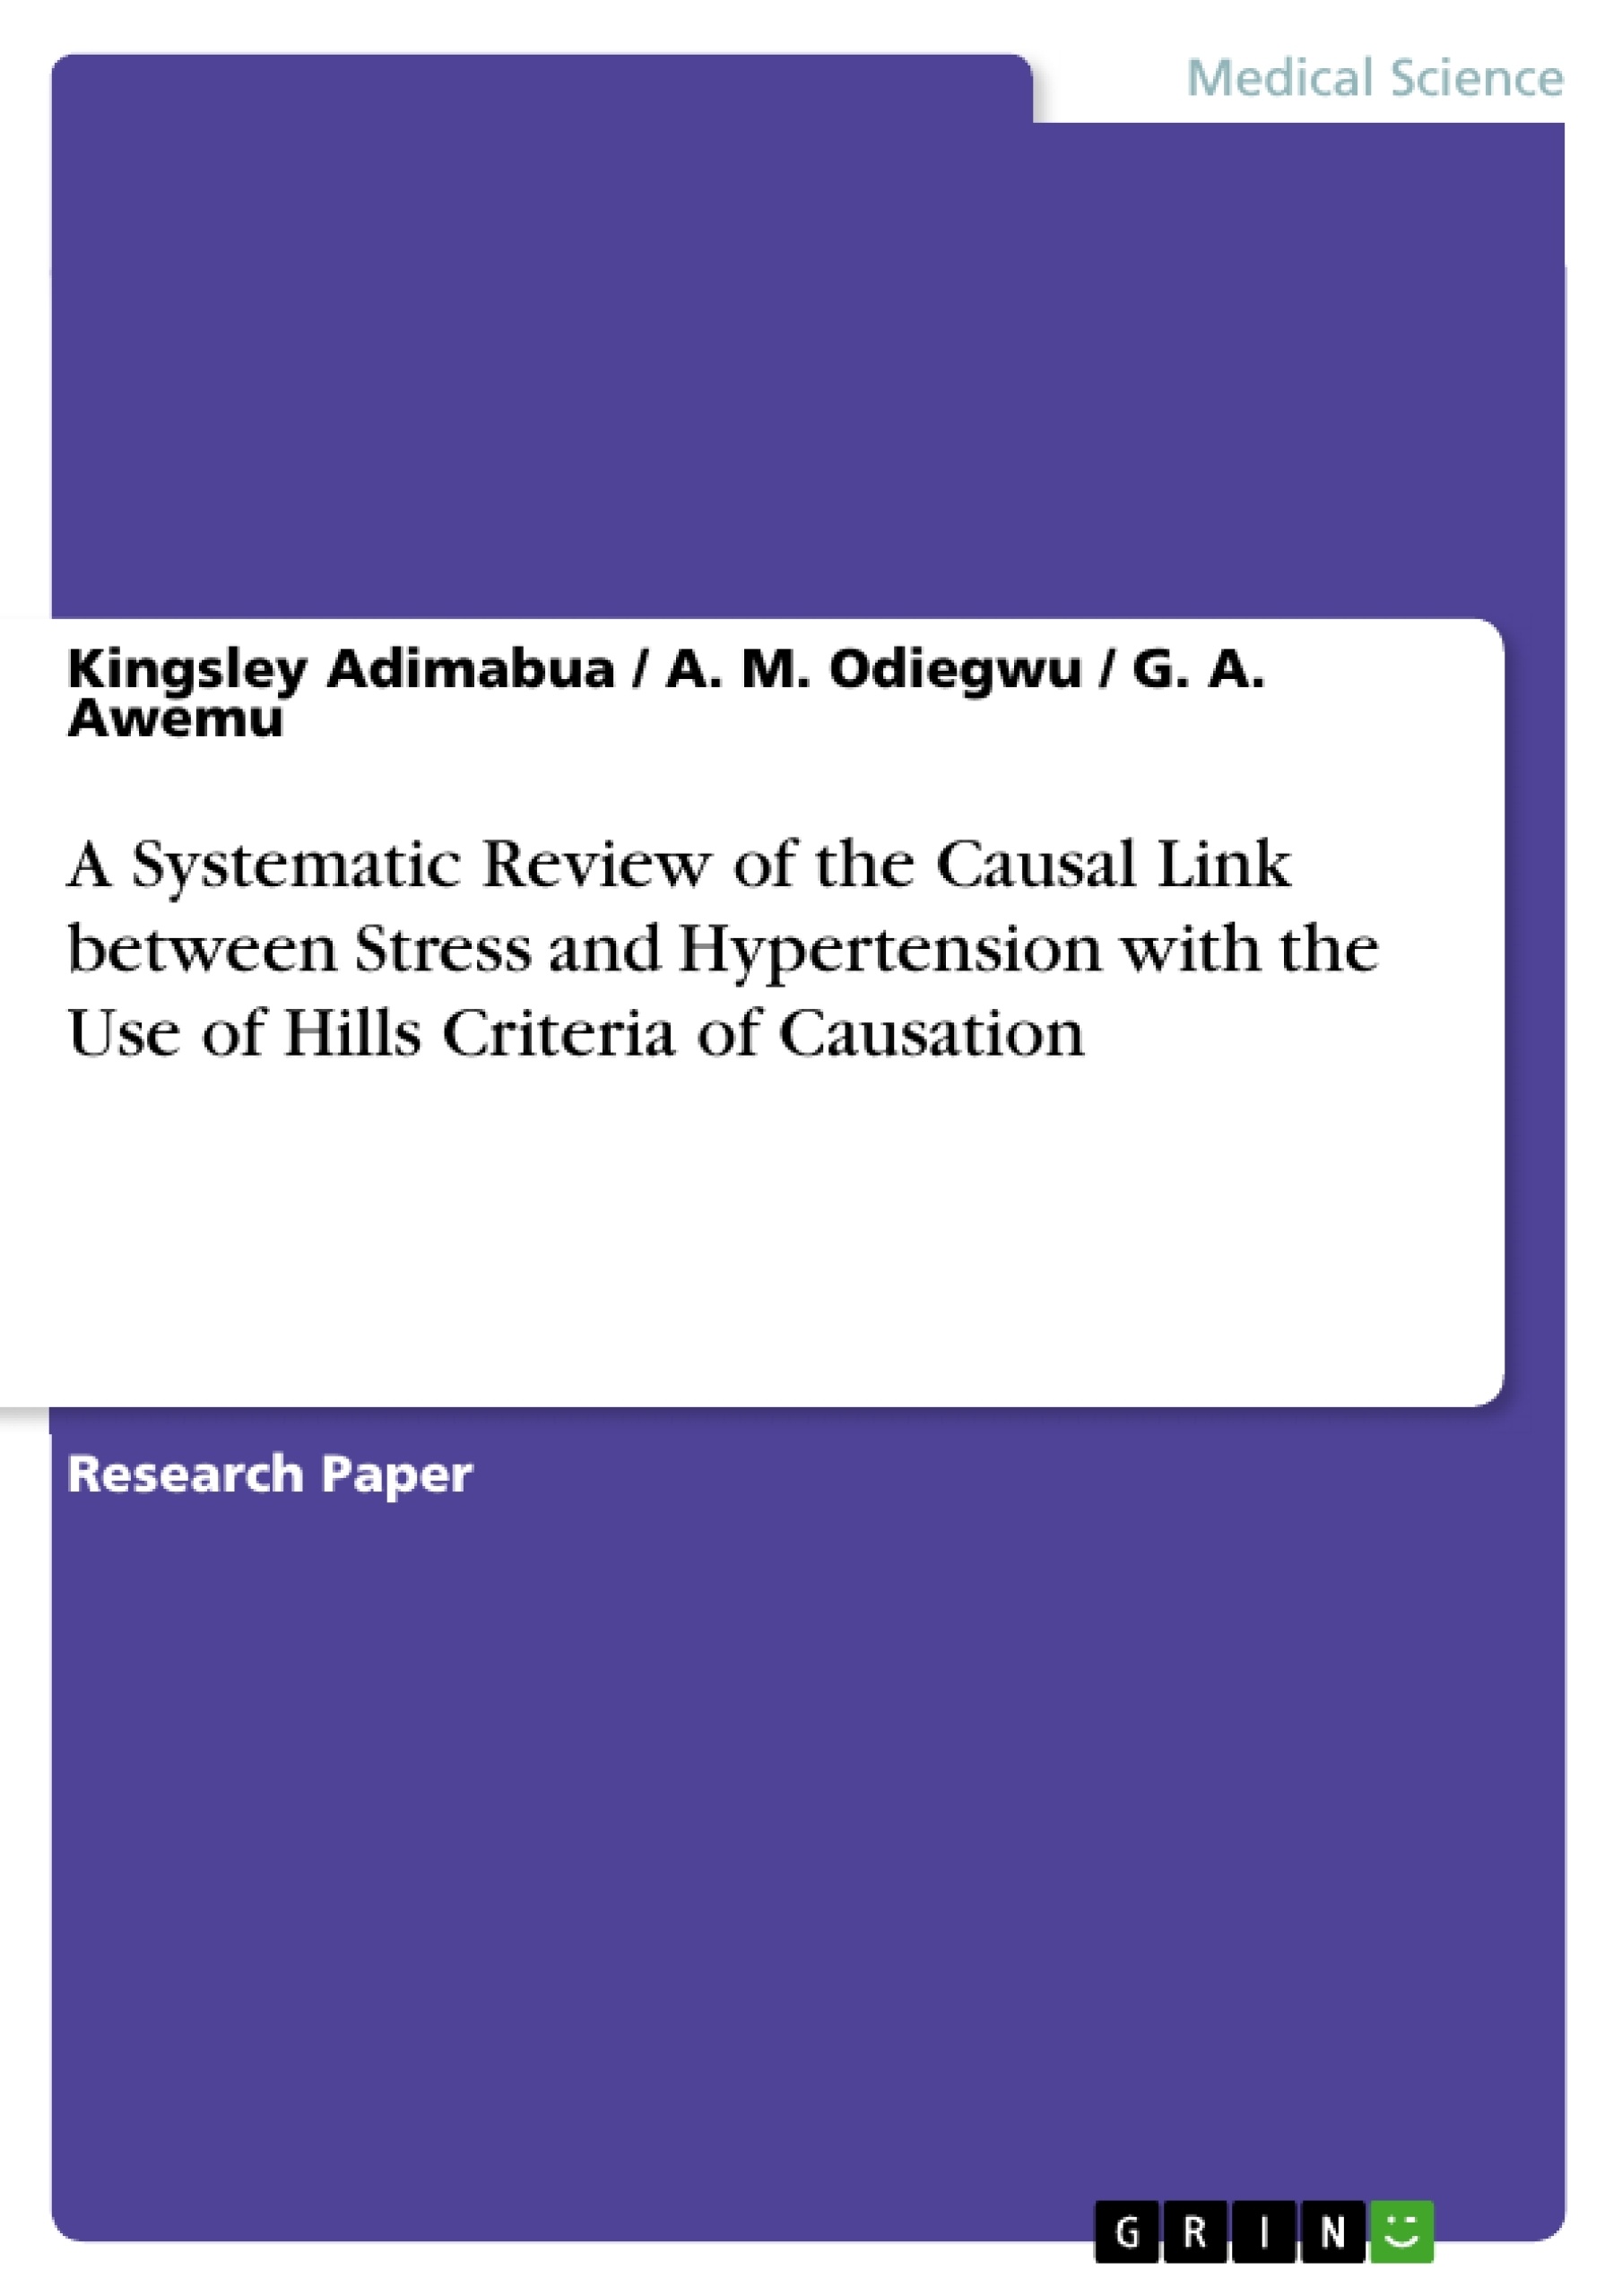 Titre: A Systematic Review of the Causal Link between Stress and Hypertension with the Use of Hills Criteria of Causation